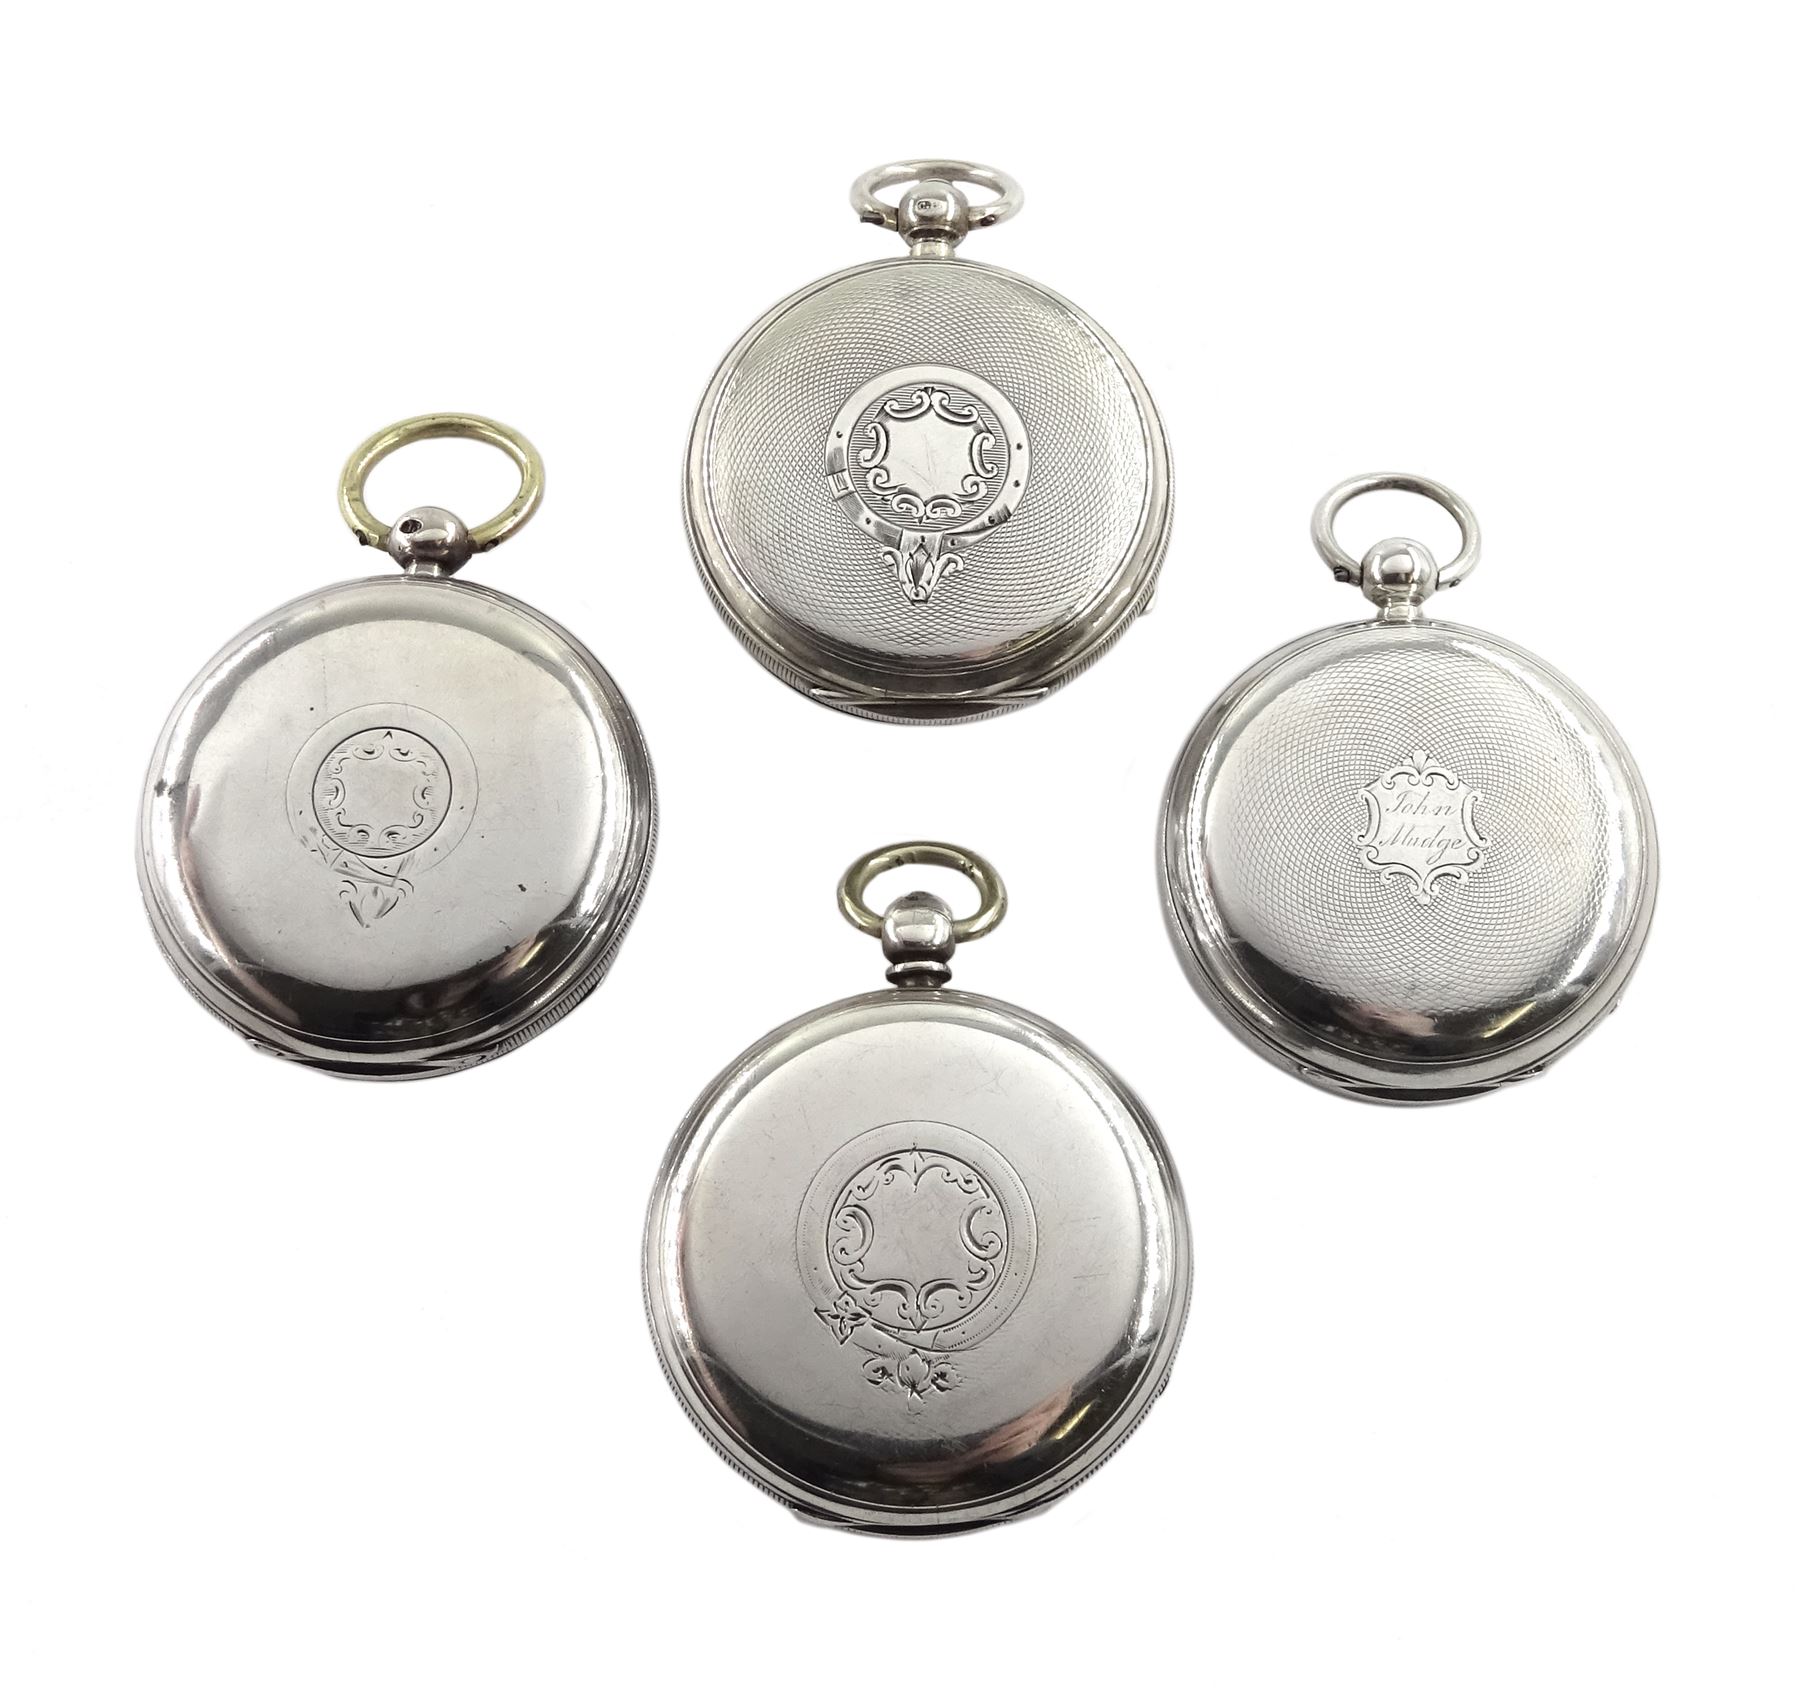 Four 19th/early 20th century silver open face English lever fusee pocket watches, white enamel dials - Image 2 of 6